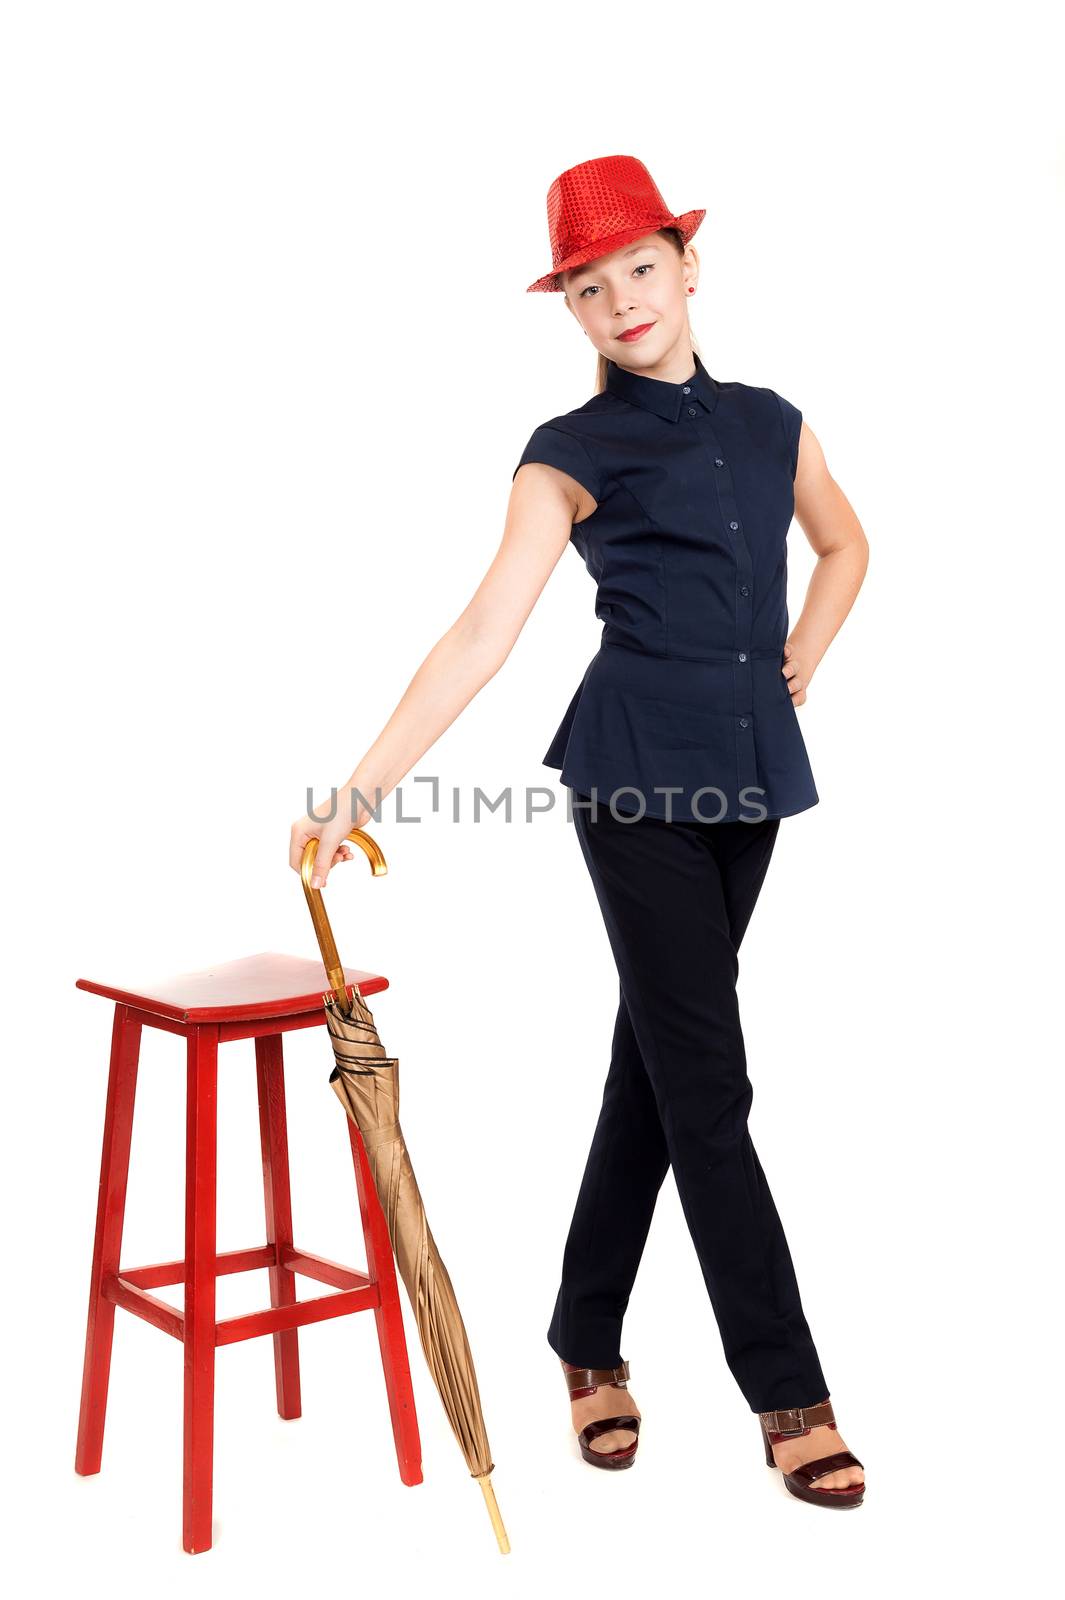 The girl the teenager in a suit and a hat with an umbrella in hands about a red chair on a white background